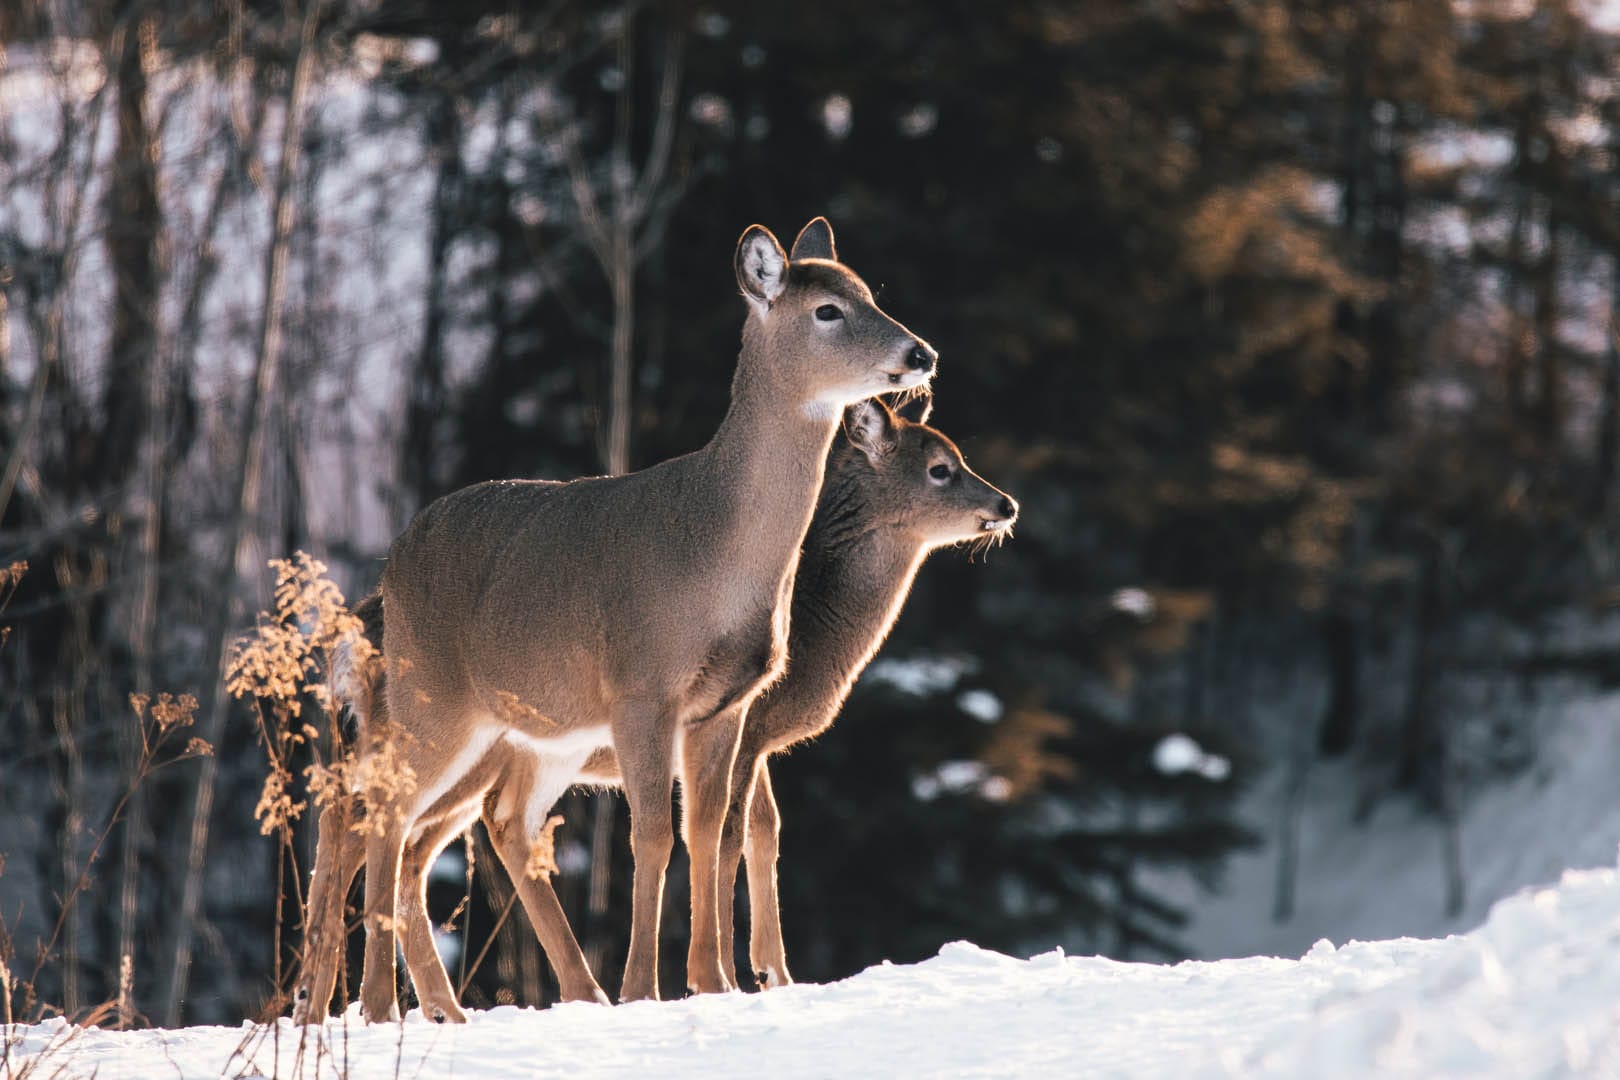 Two female deer standing next to each other in the winter woods. They're lit beautifully by a warm sunlight despite having frozen snow and ice on their snouts.